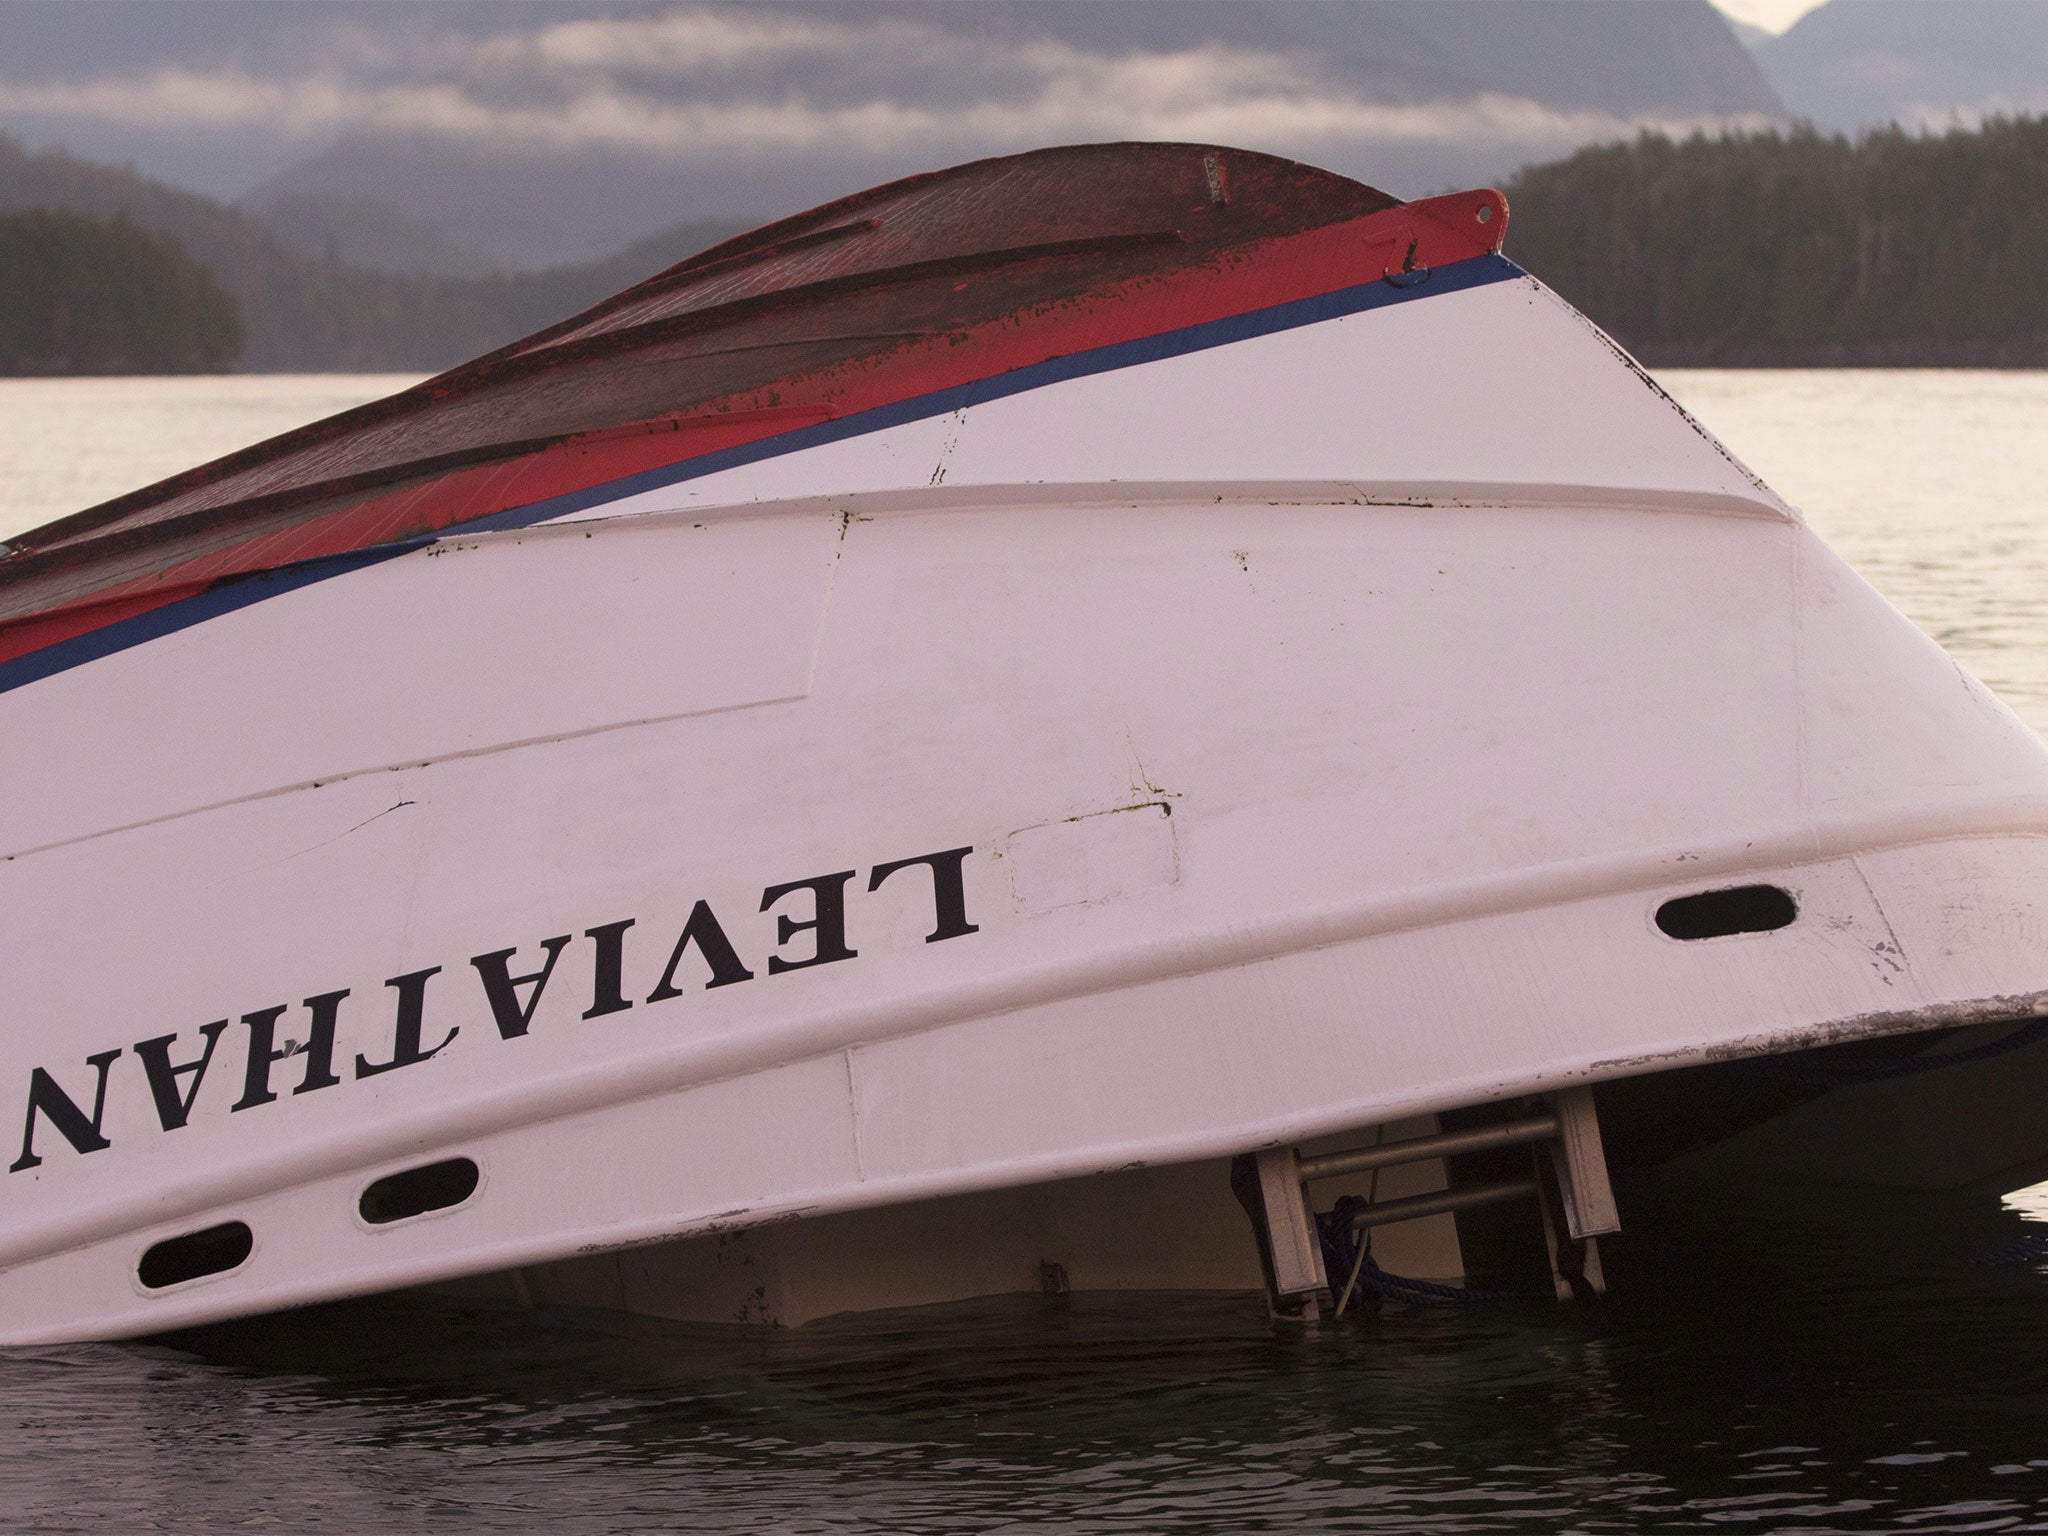 Leviathan got in to difficulty about eight miles from the small town of Tofino